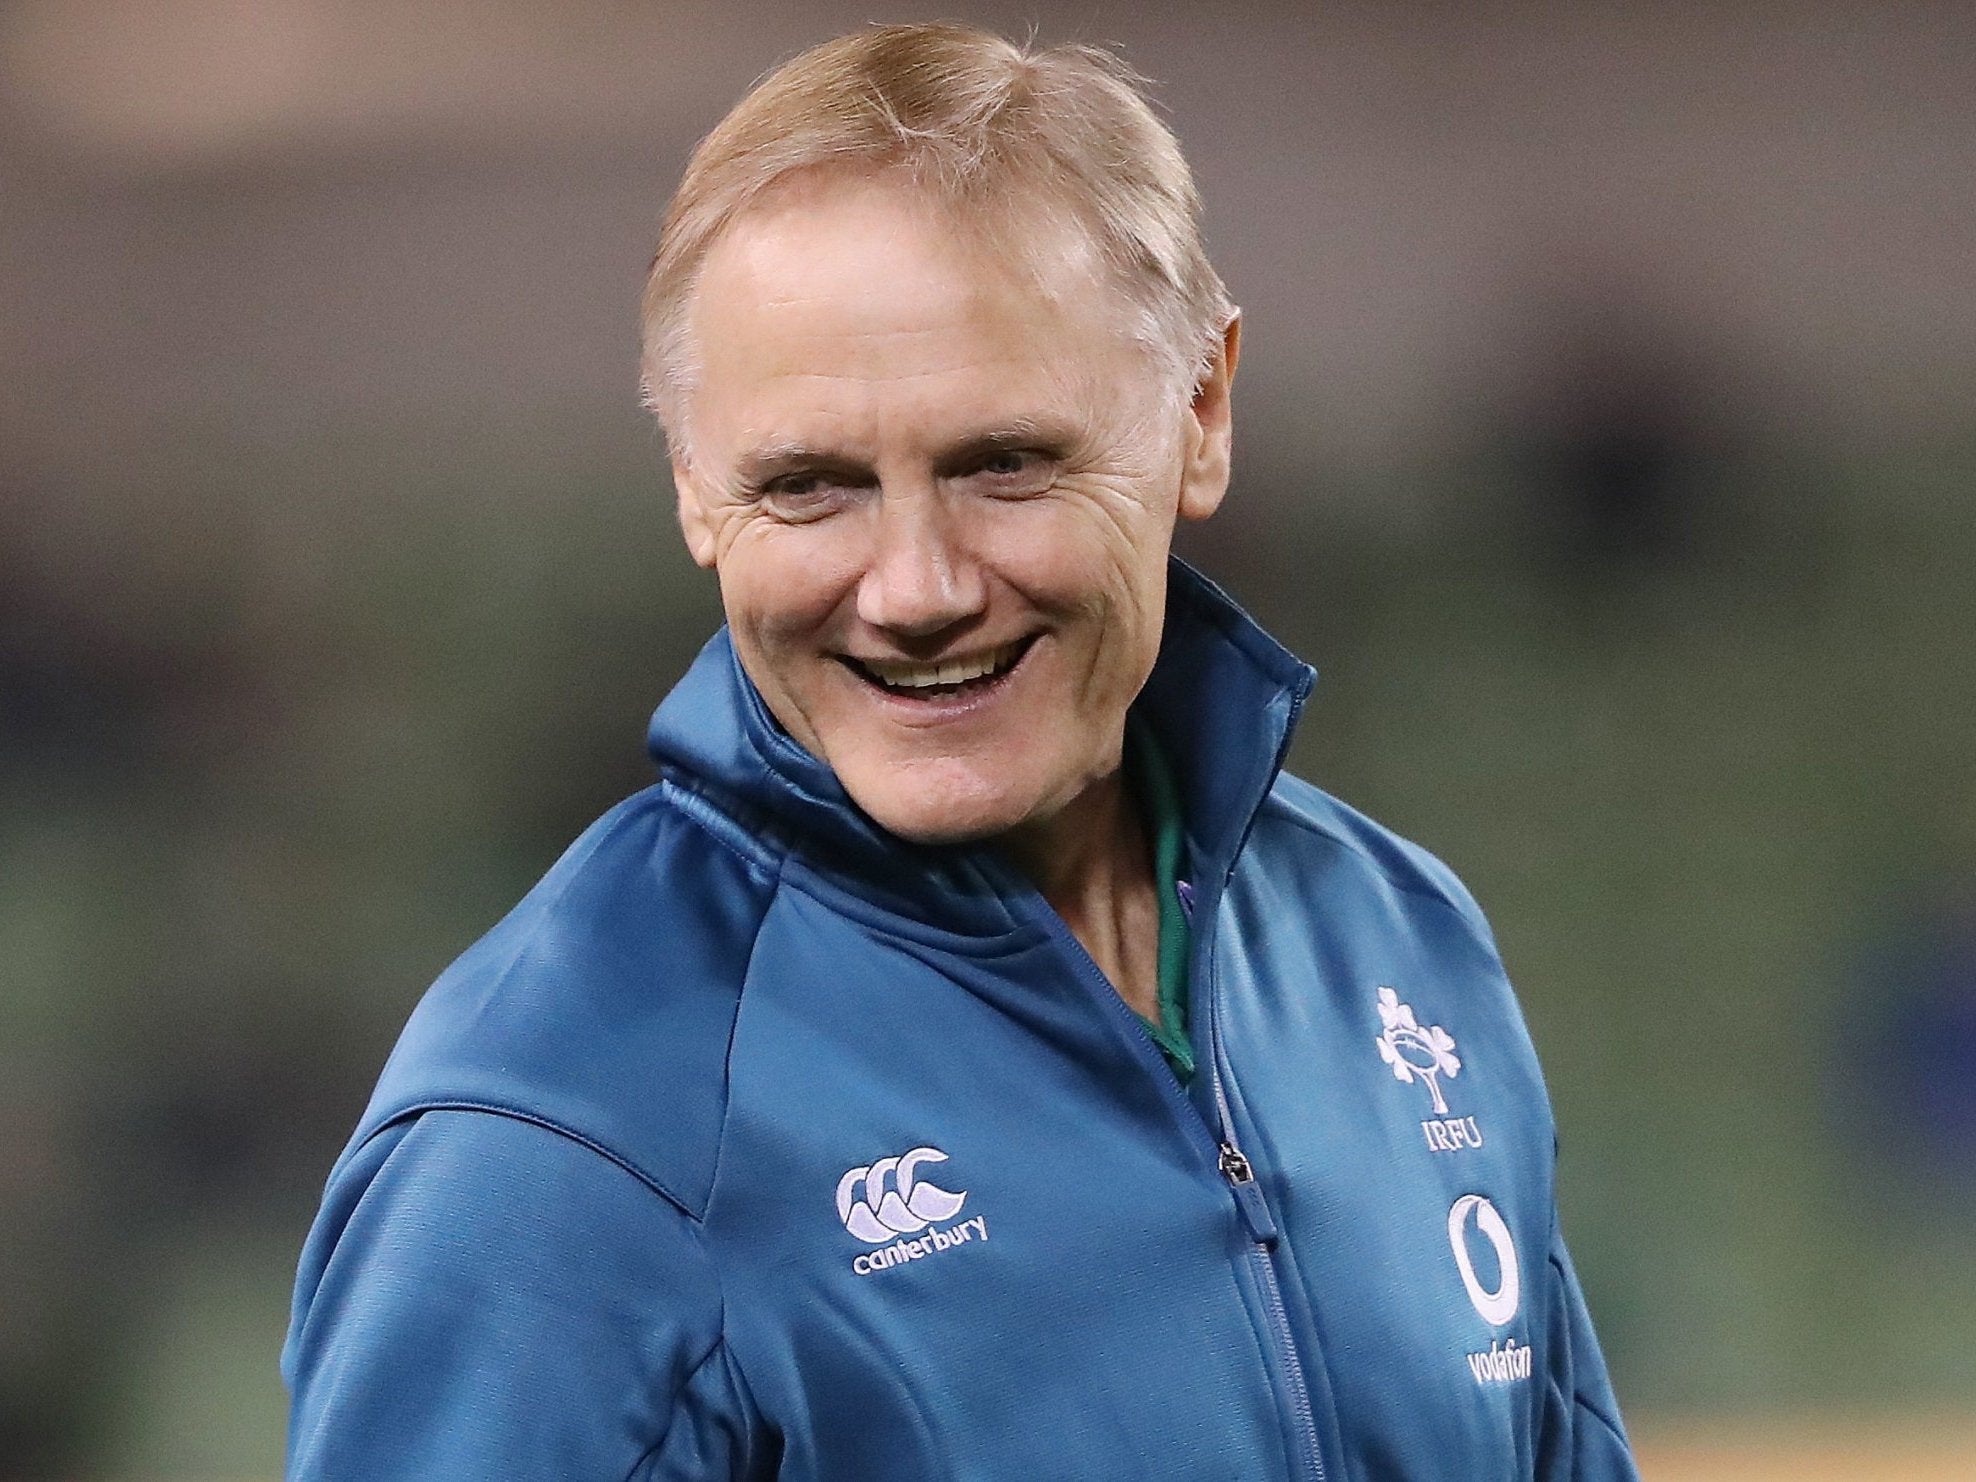 Joe Schmidt will retire from coaching after next year's World Cup